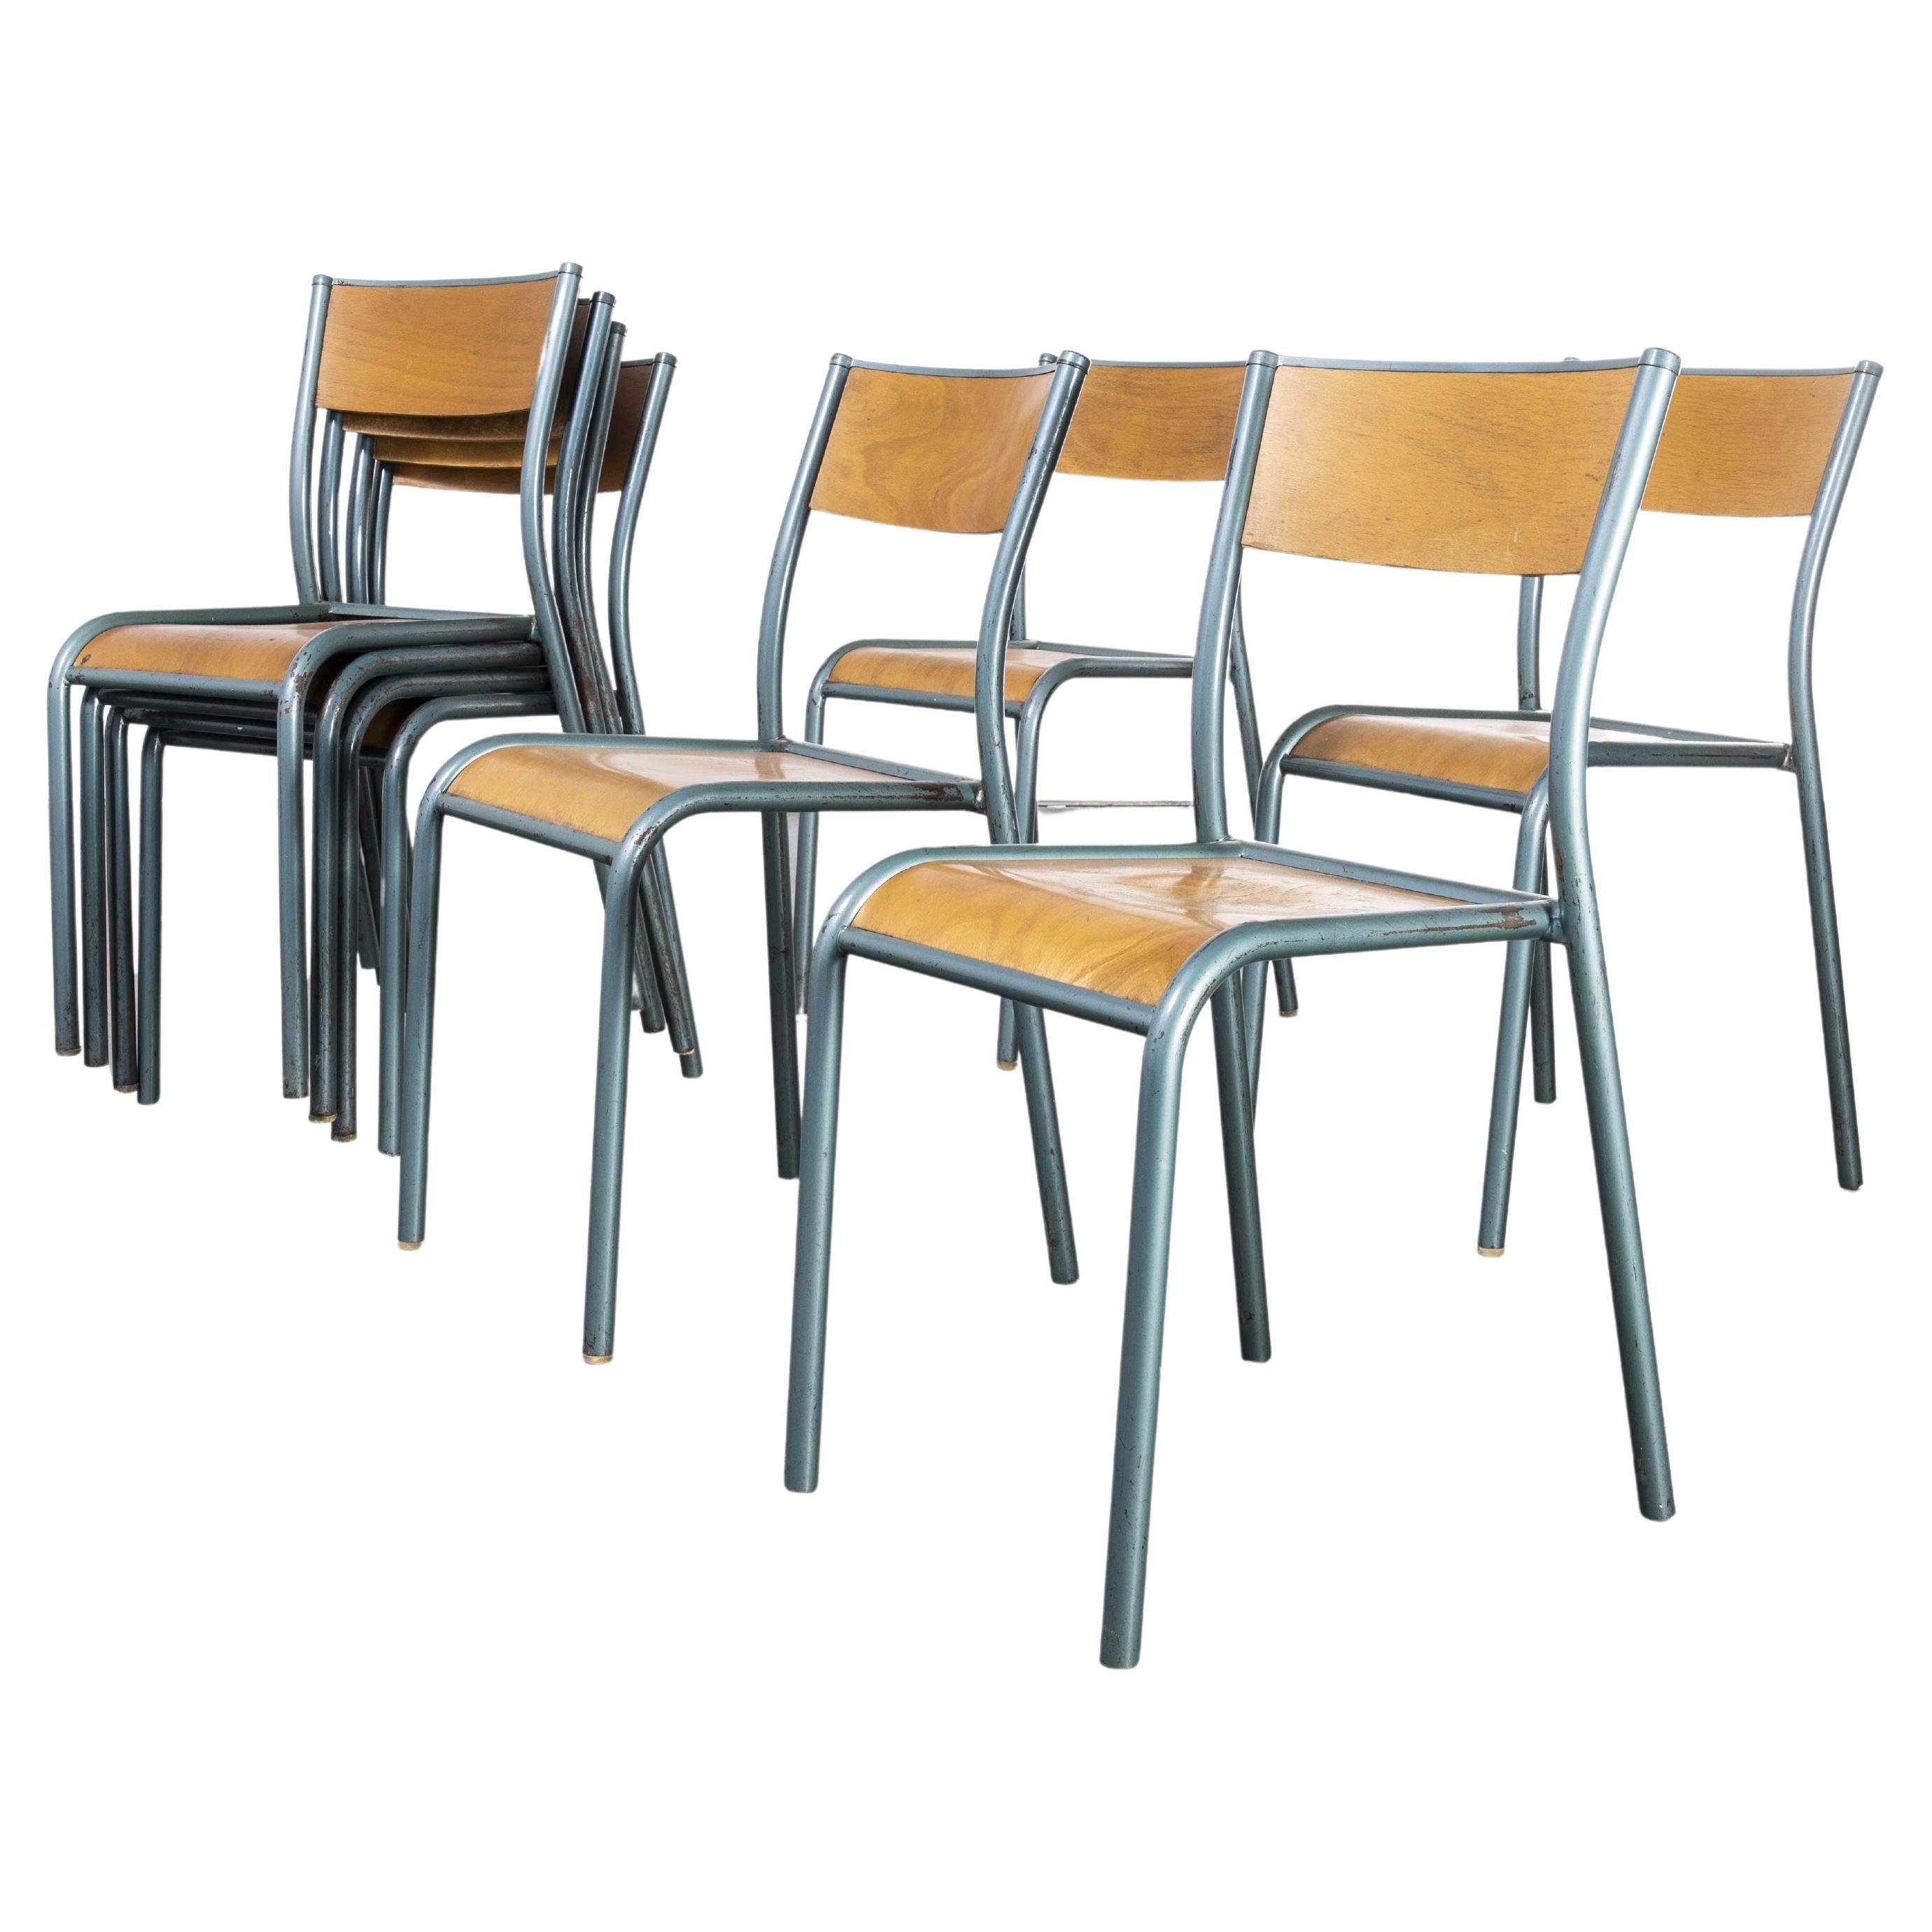 1960's French Mullca Stacking, Dining Chairs, Aqua Model 510, Set of Six For Sale